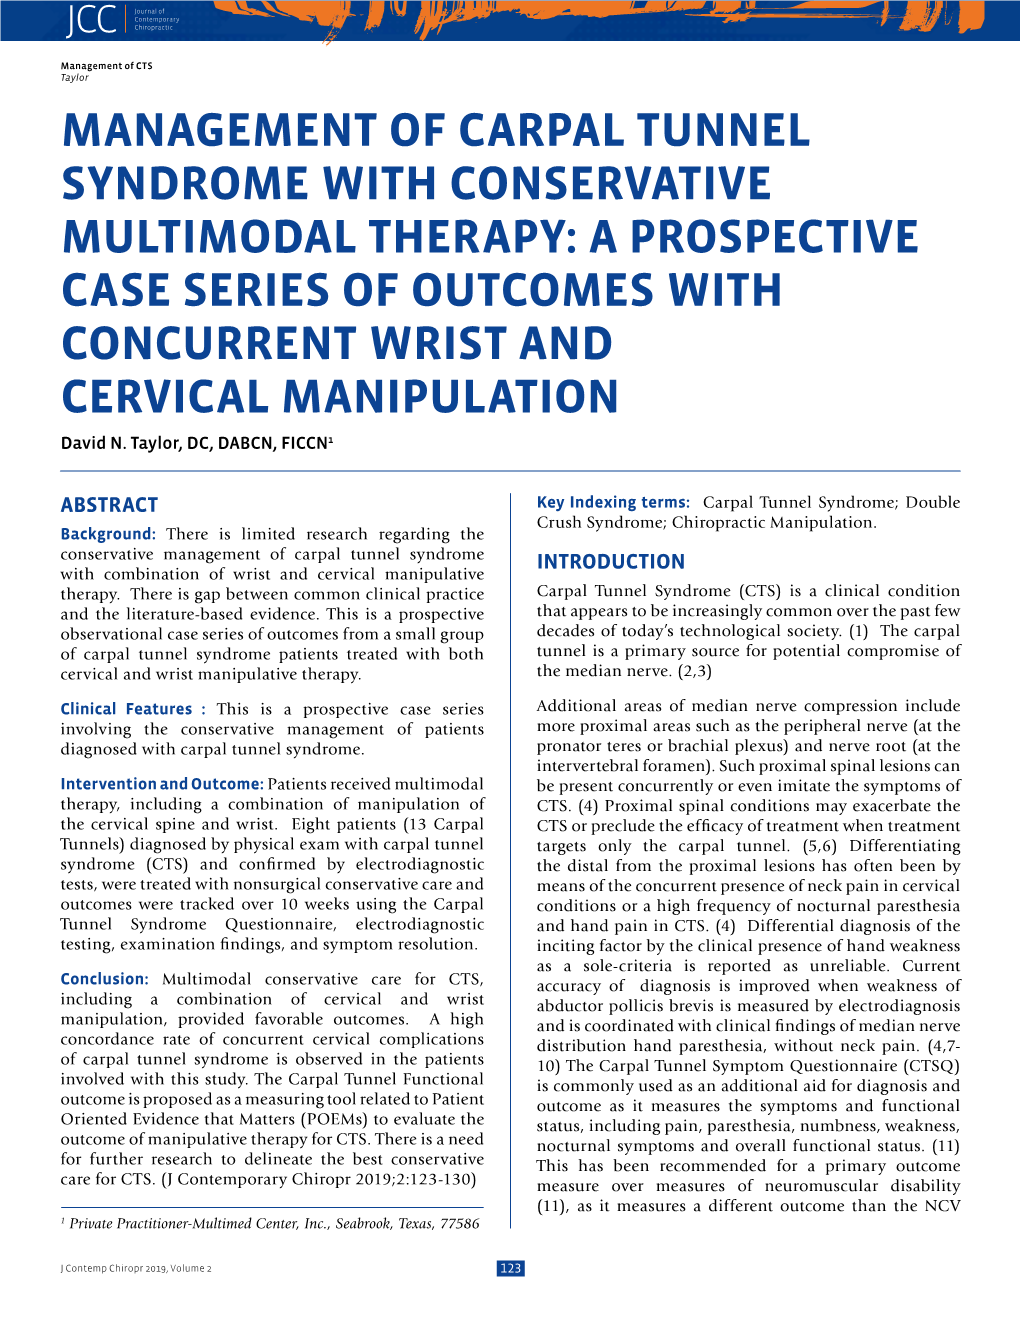 CARPAL TUNNEL SYNDROME with CONSERVATIVE MULTIMODAL THERAPY: a PROSPECTIVE CASE SERIES of OUTCOMES with CONCURRENT WRIST and CERVICAL MANIPULATION David N